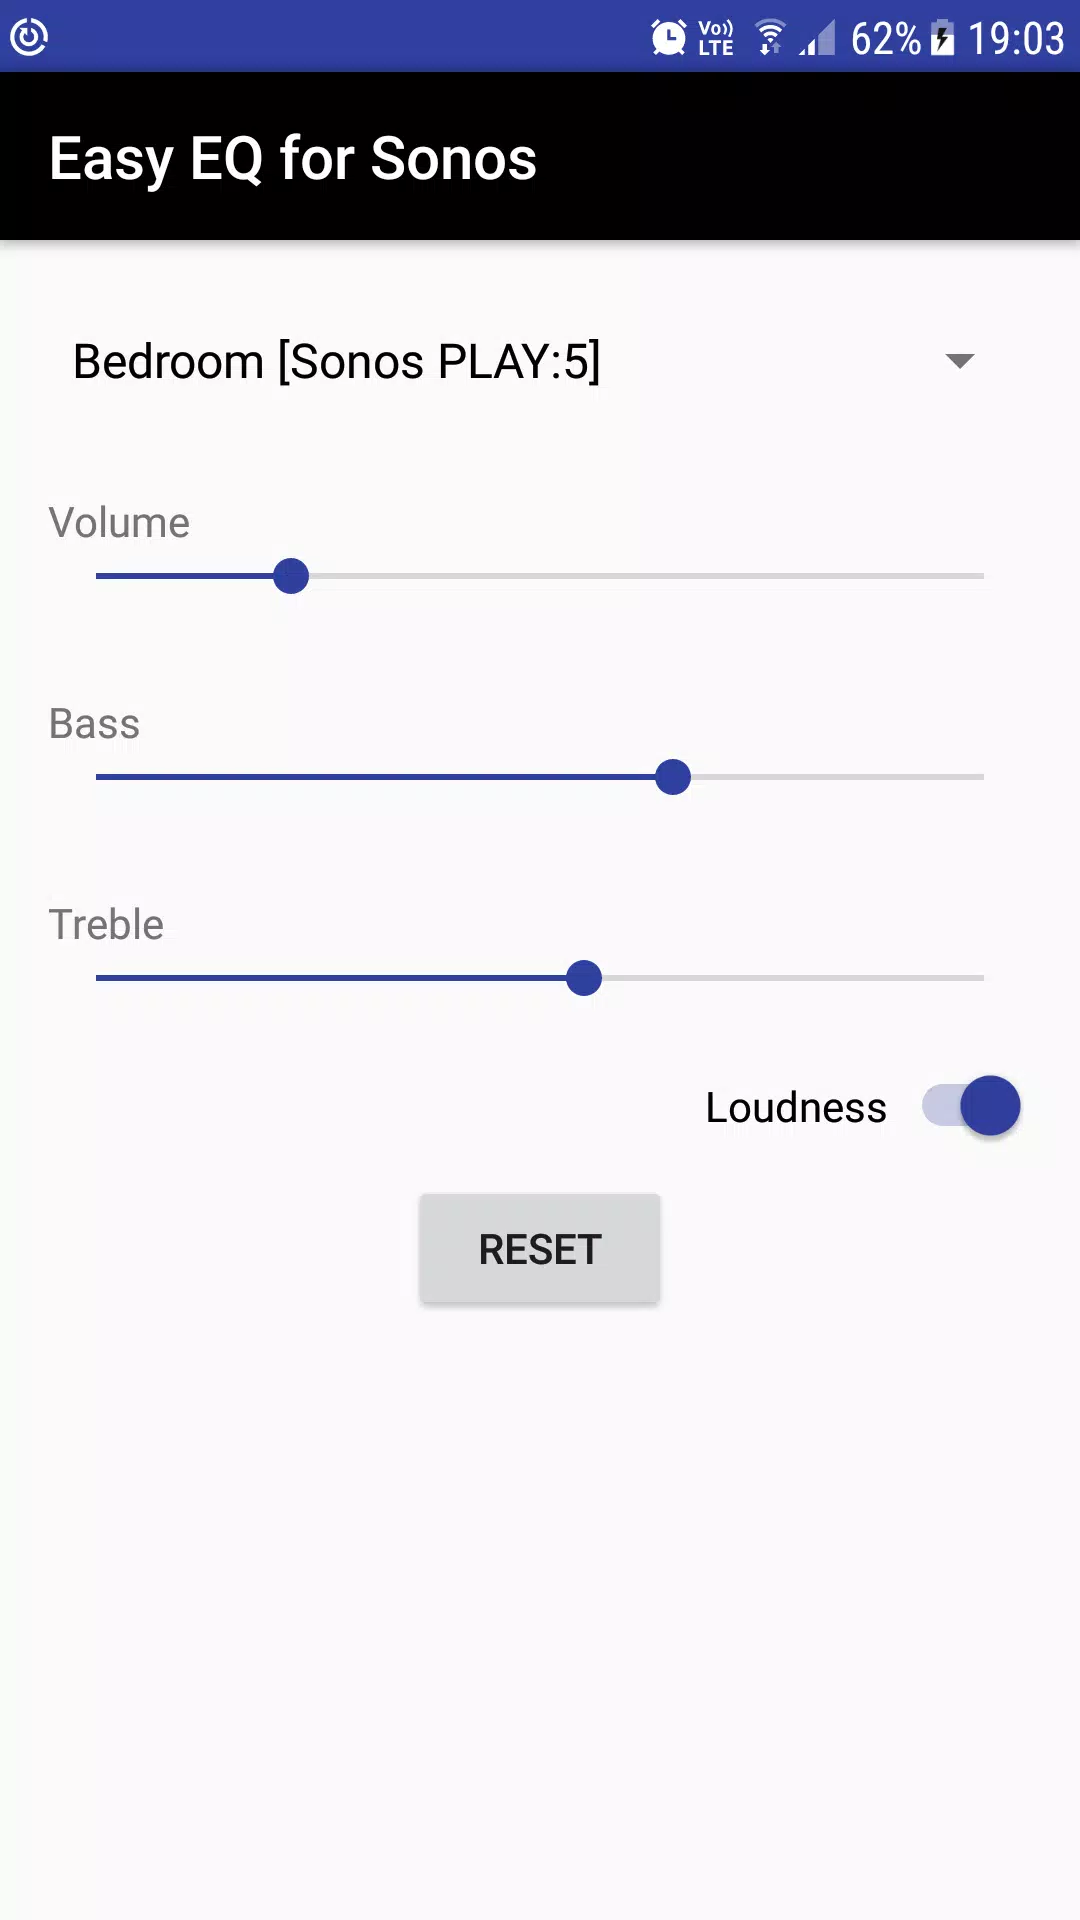 Easy EQ for Sonos for Android - APK Download